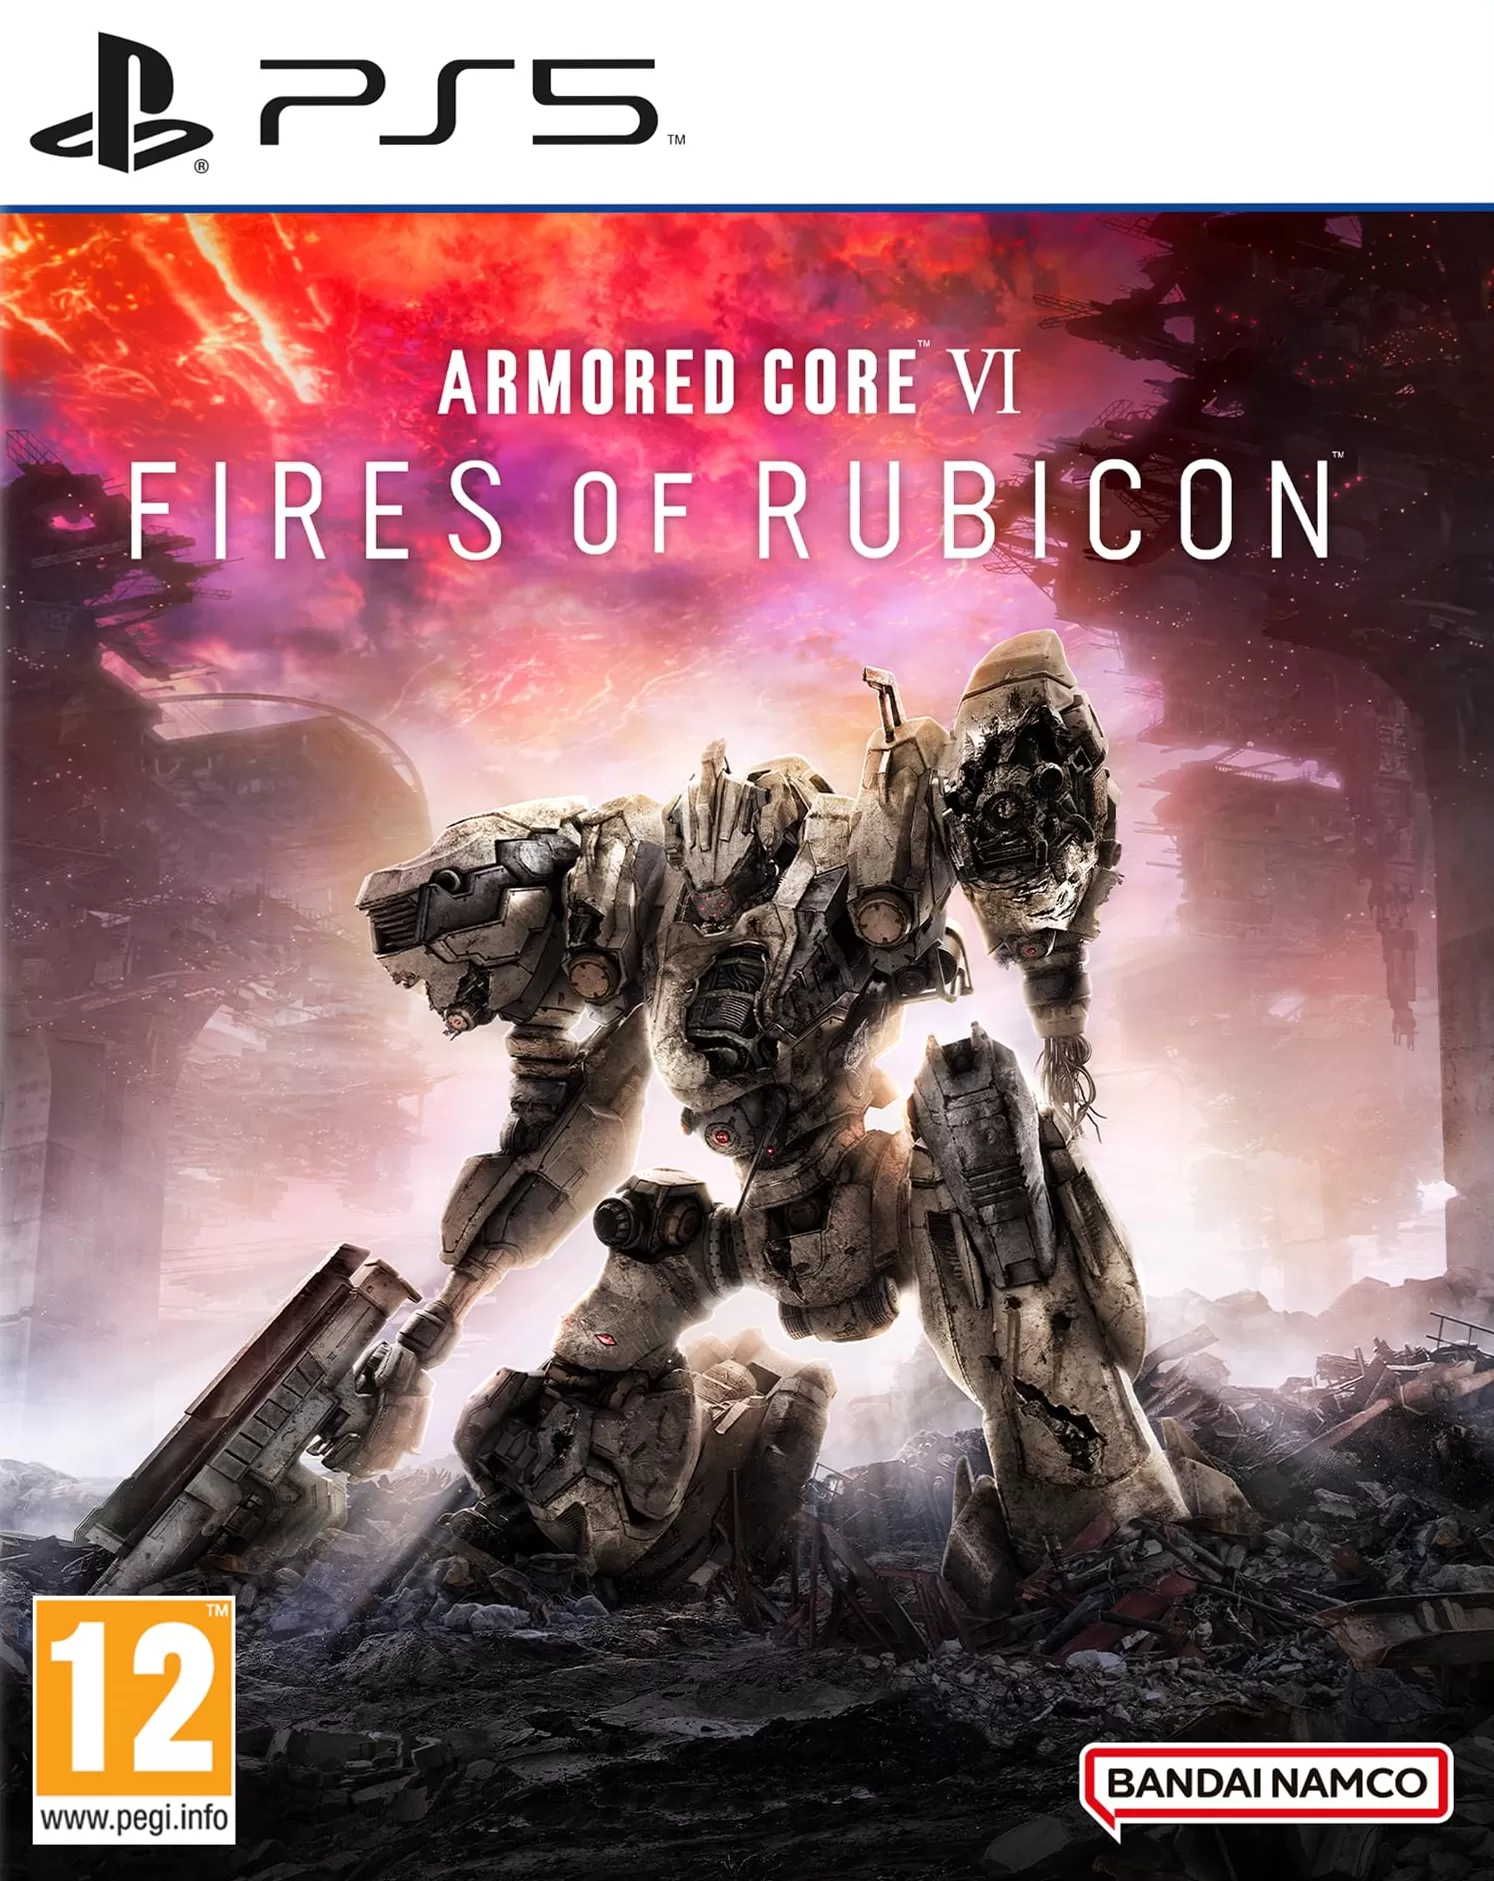 Armored core tm vi. Armored Core 6: Fires of Rubicon. Armored-Core-vi-6-Fires-of-Rubicon. Armored Core vi: Fires of Rubicon ps5. Armored Core vi(6) Fires of Rubicon Launch Edition.